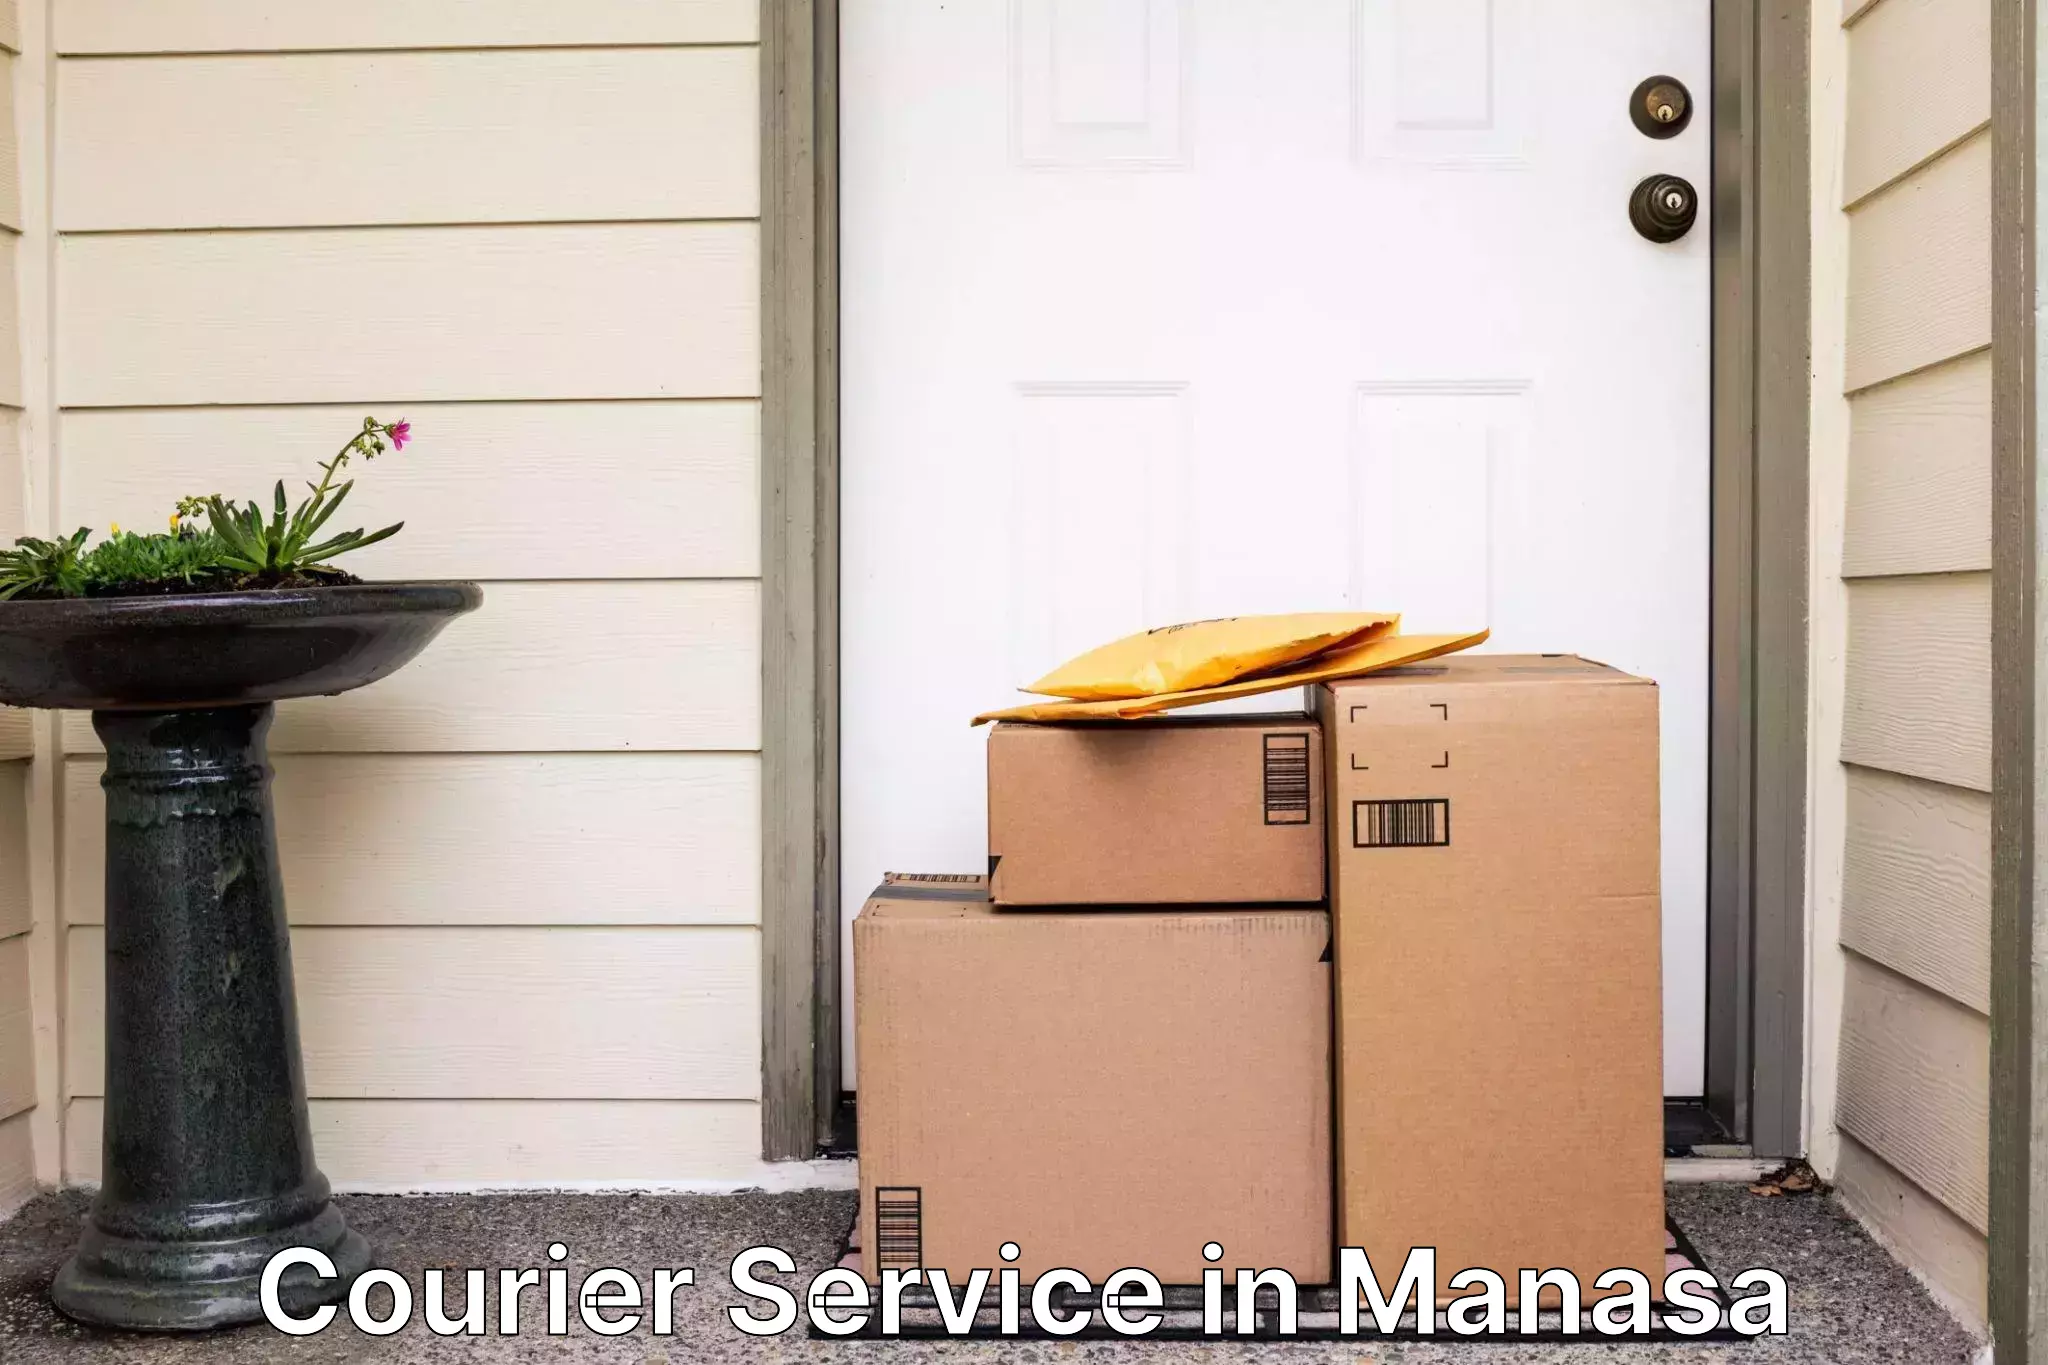 Professional parcel services in Manasa